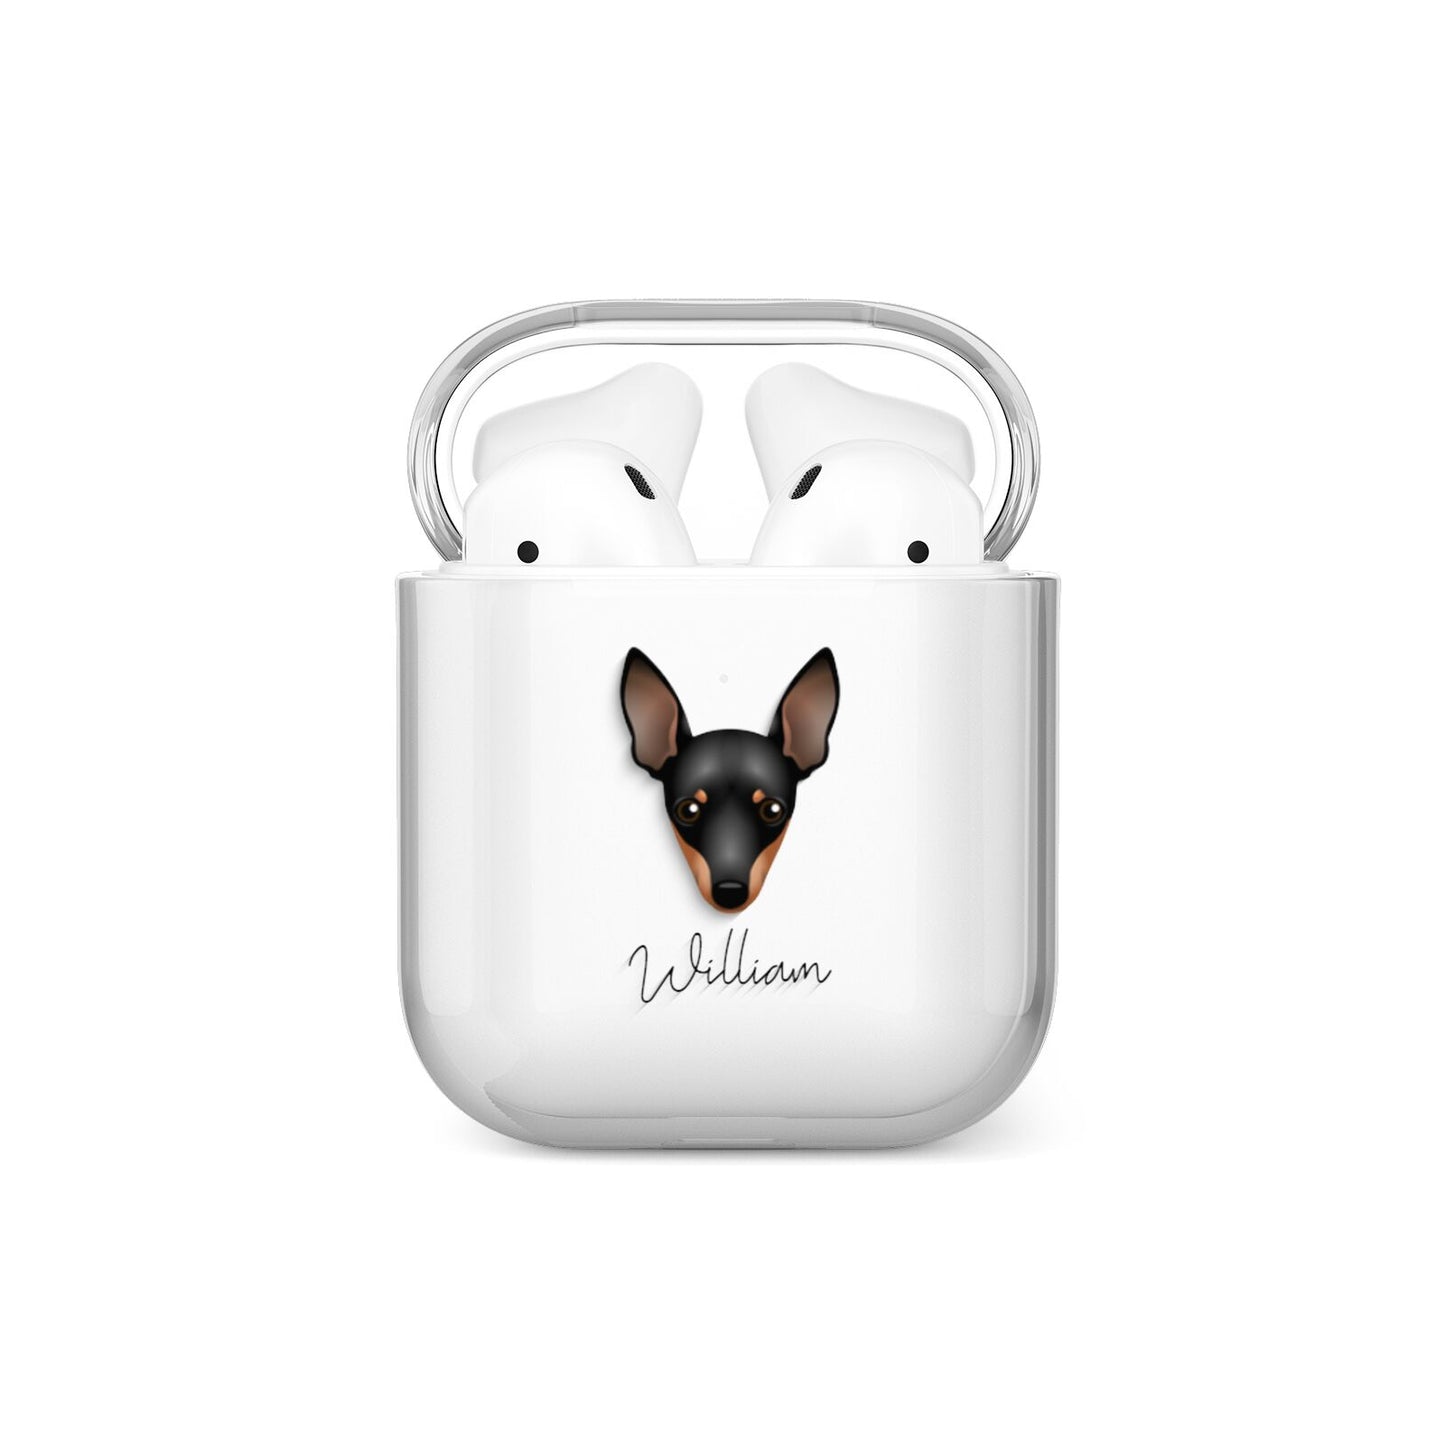 Miniature Pinscher Personalised AirPods Case